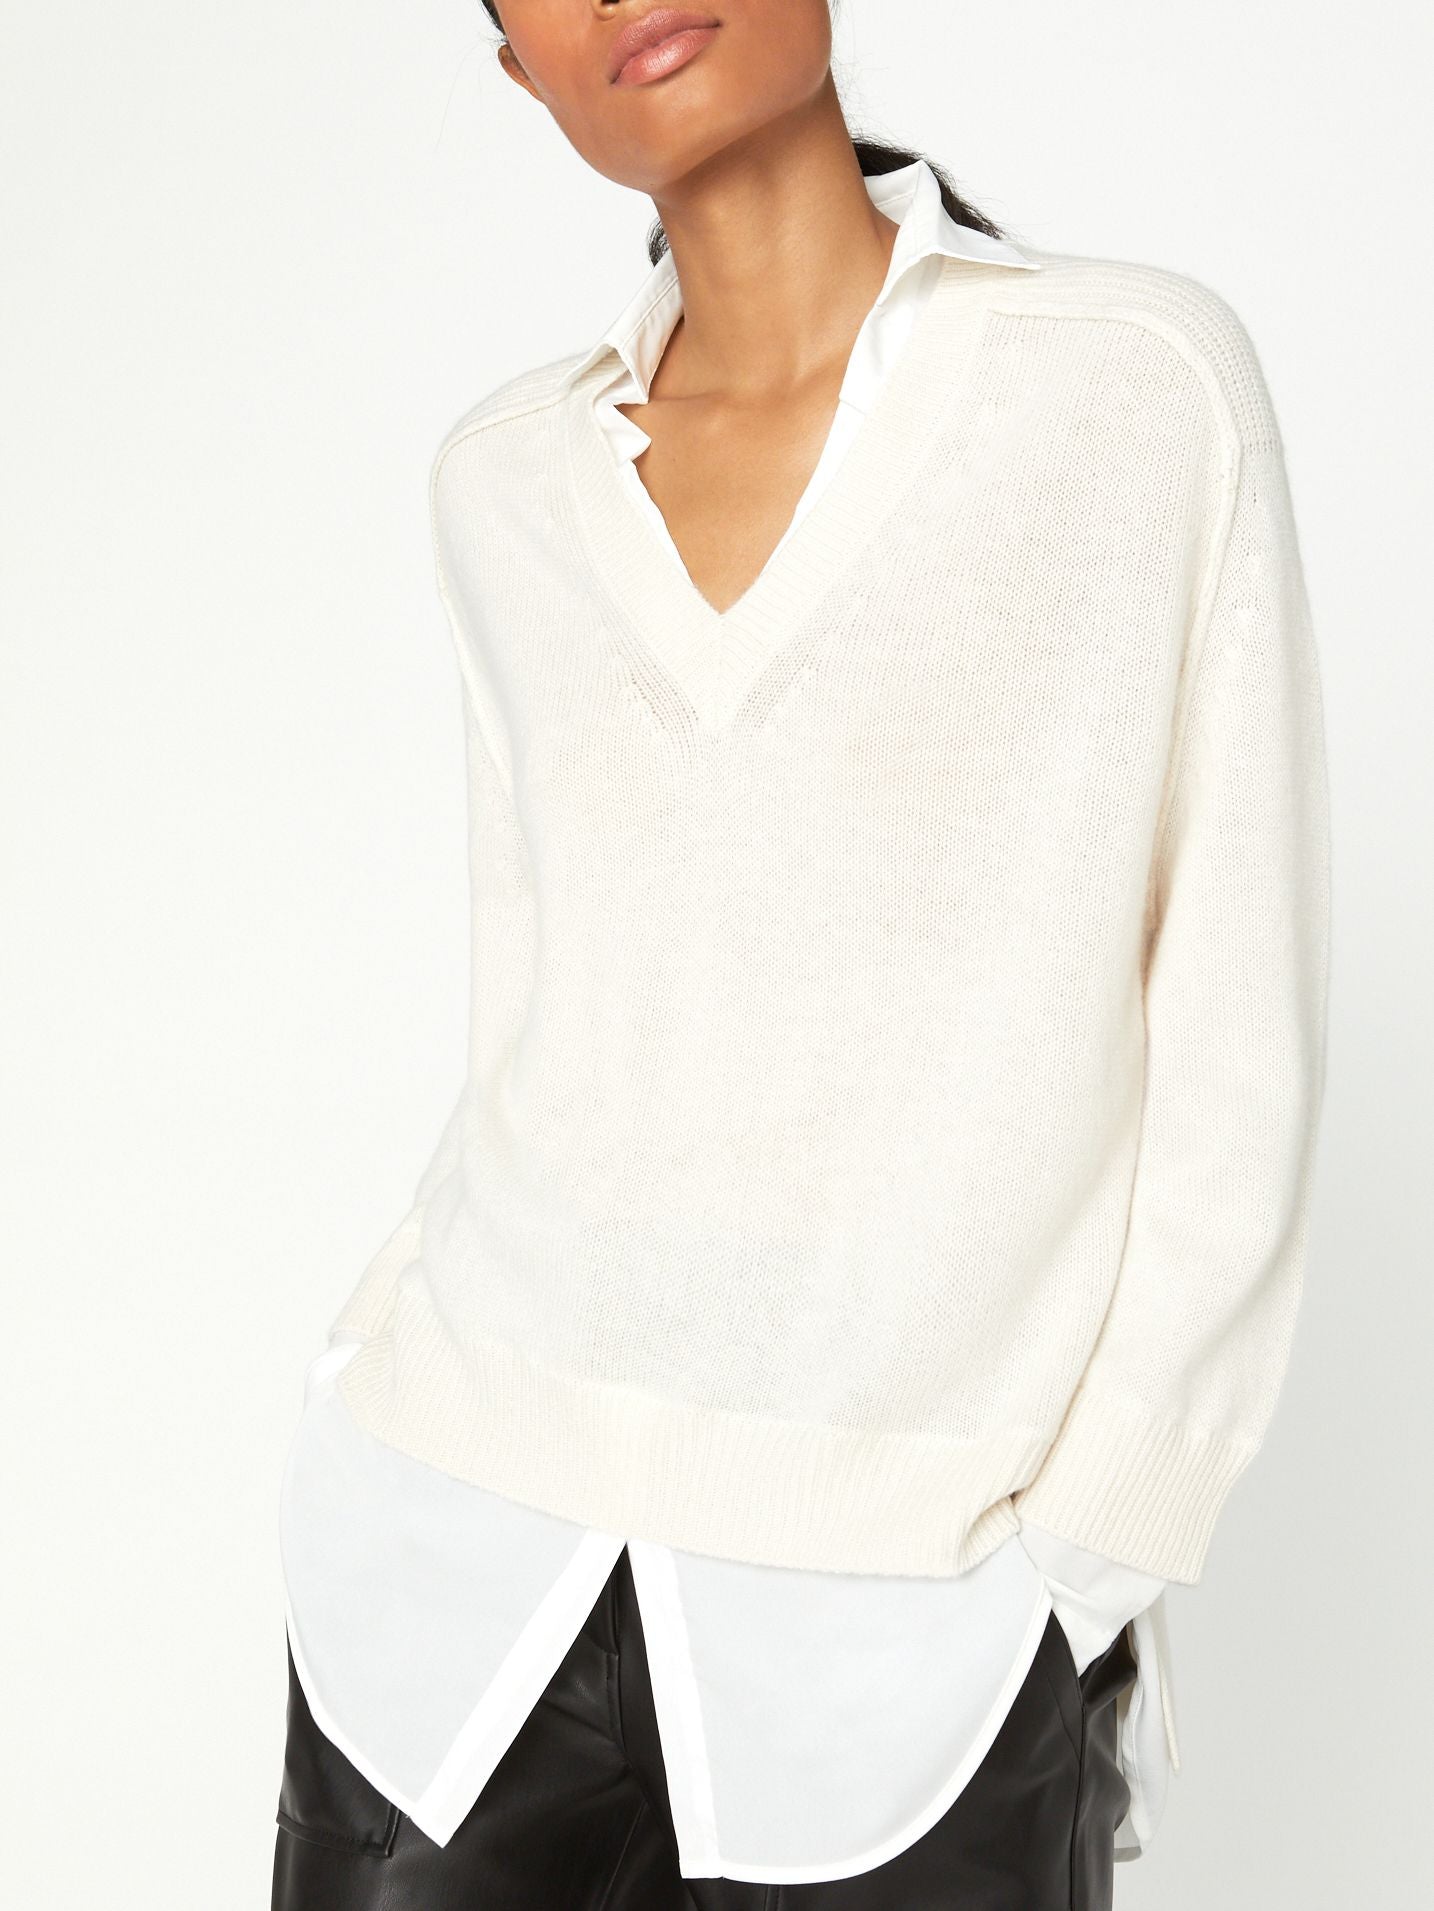 Looker ivory layered v-neck sweater front view 2